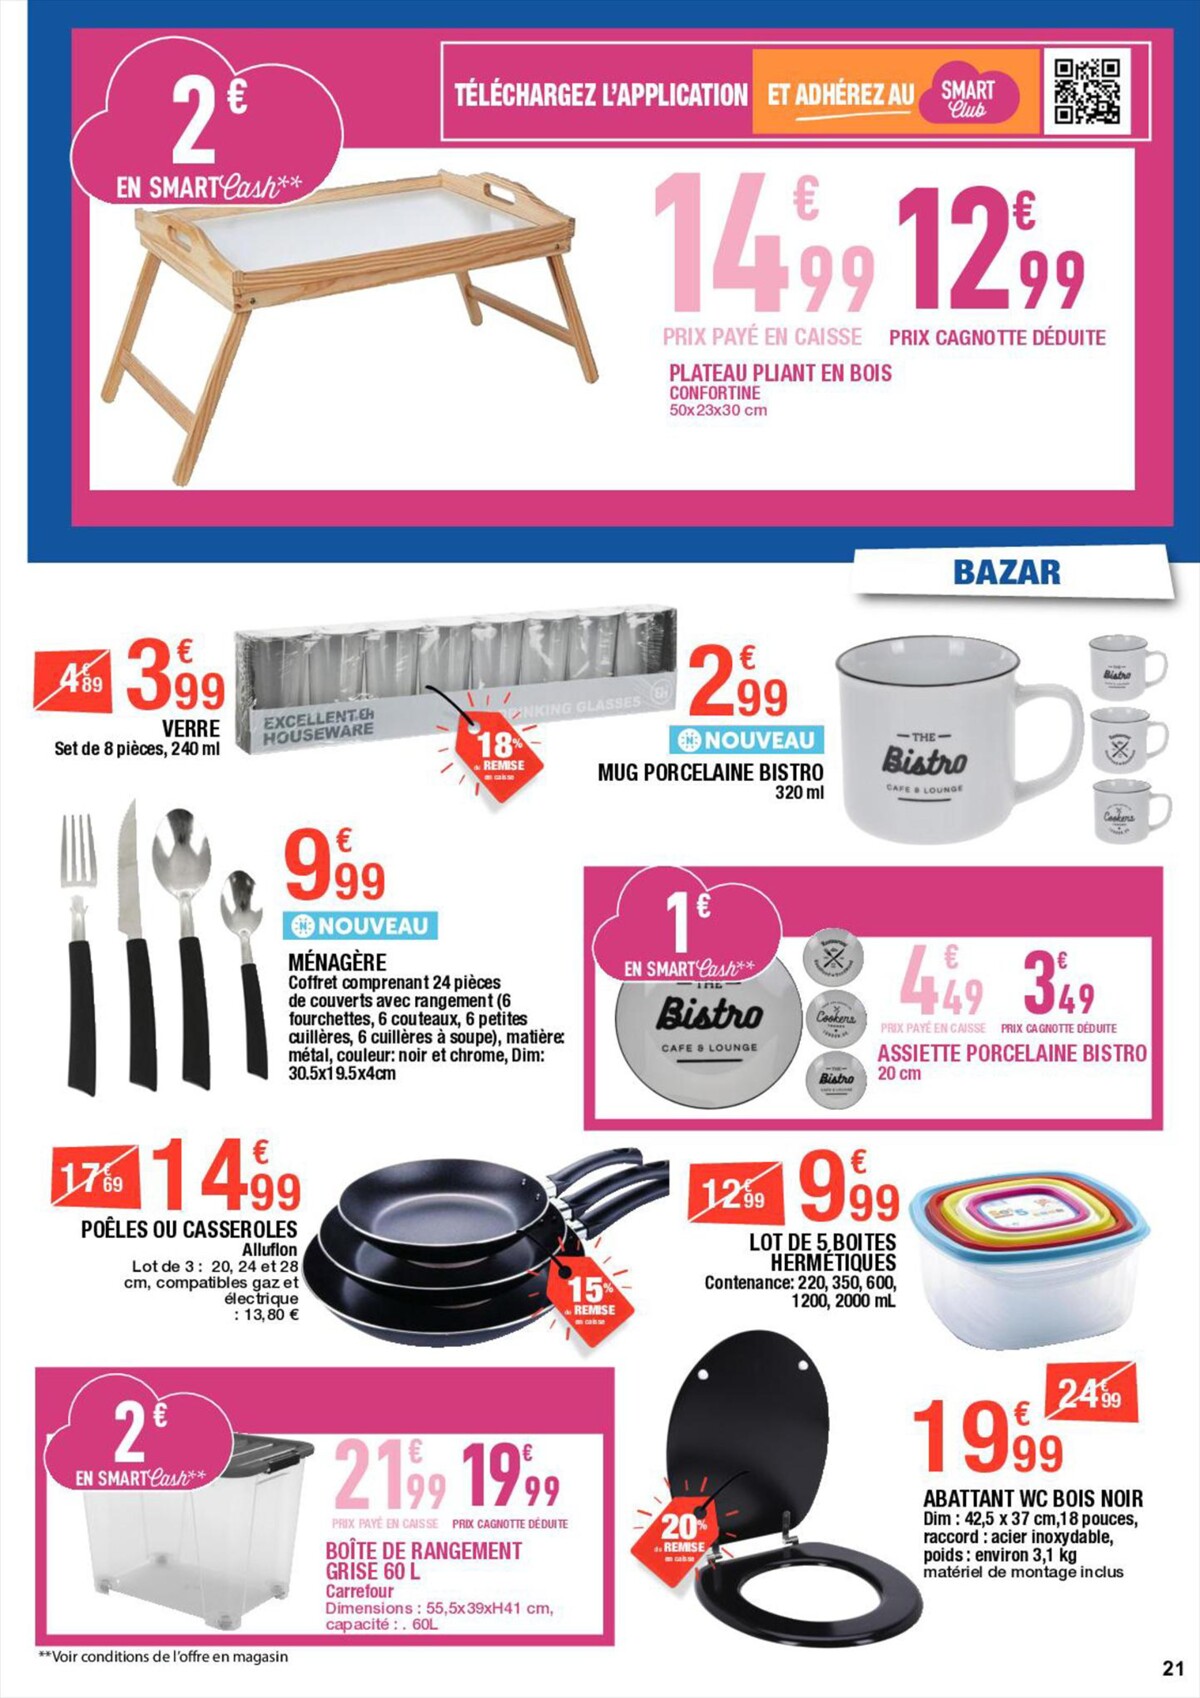 Catalogue Carrefour Special MDD, page 00021